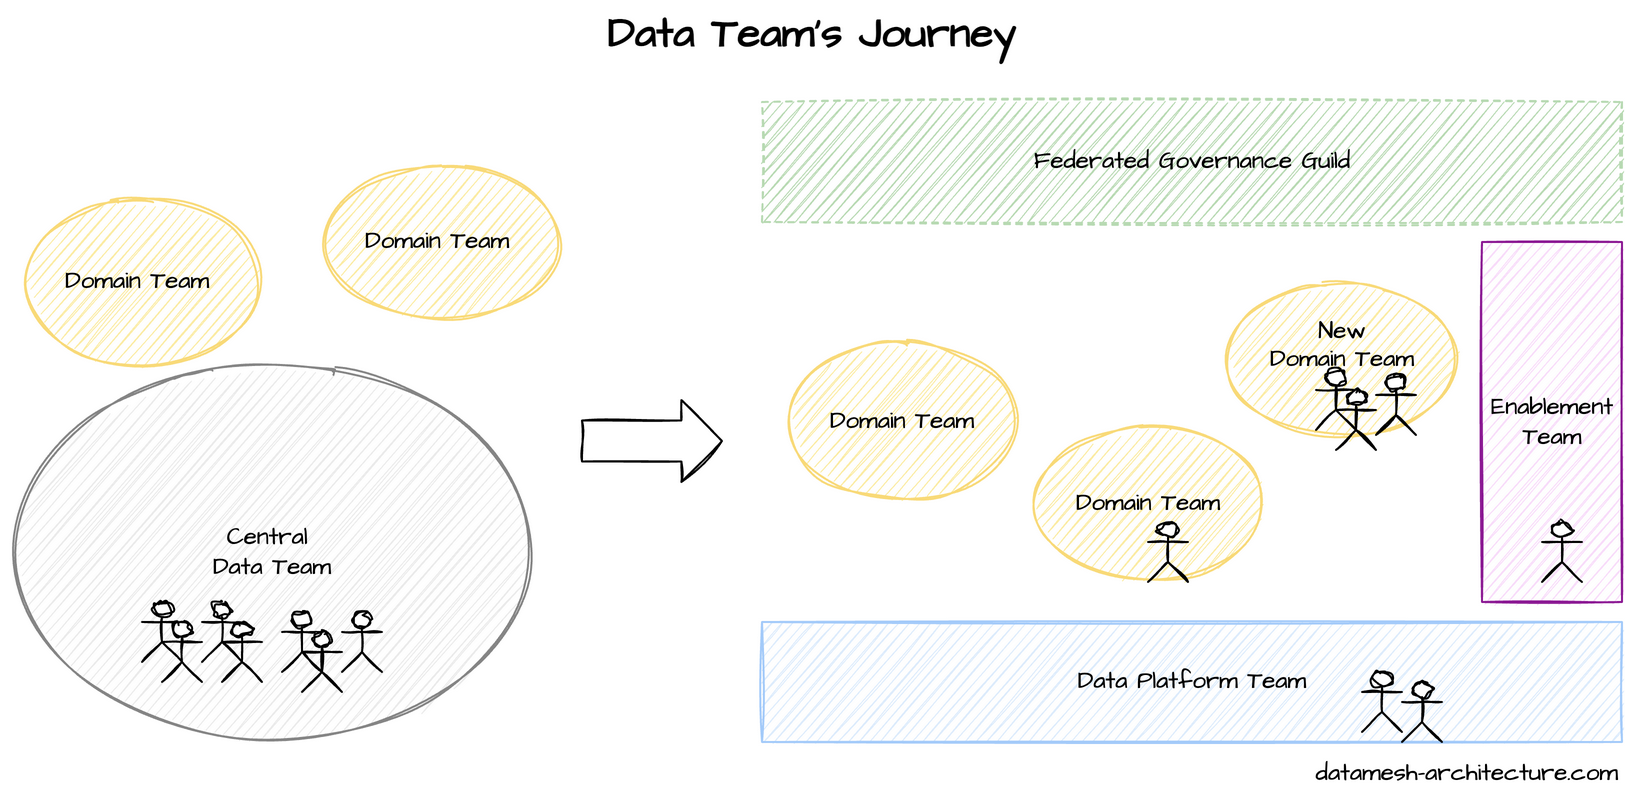 Data Team's Journey: From a central data team toward an enablement team, data platform team, and (new) domain teams with data expertise